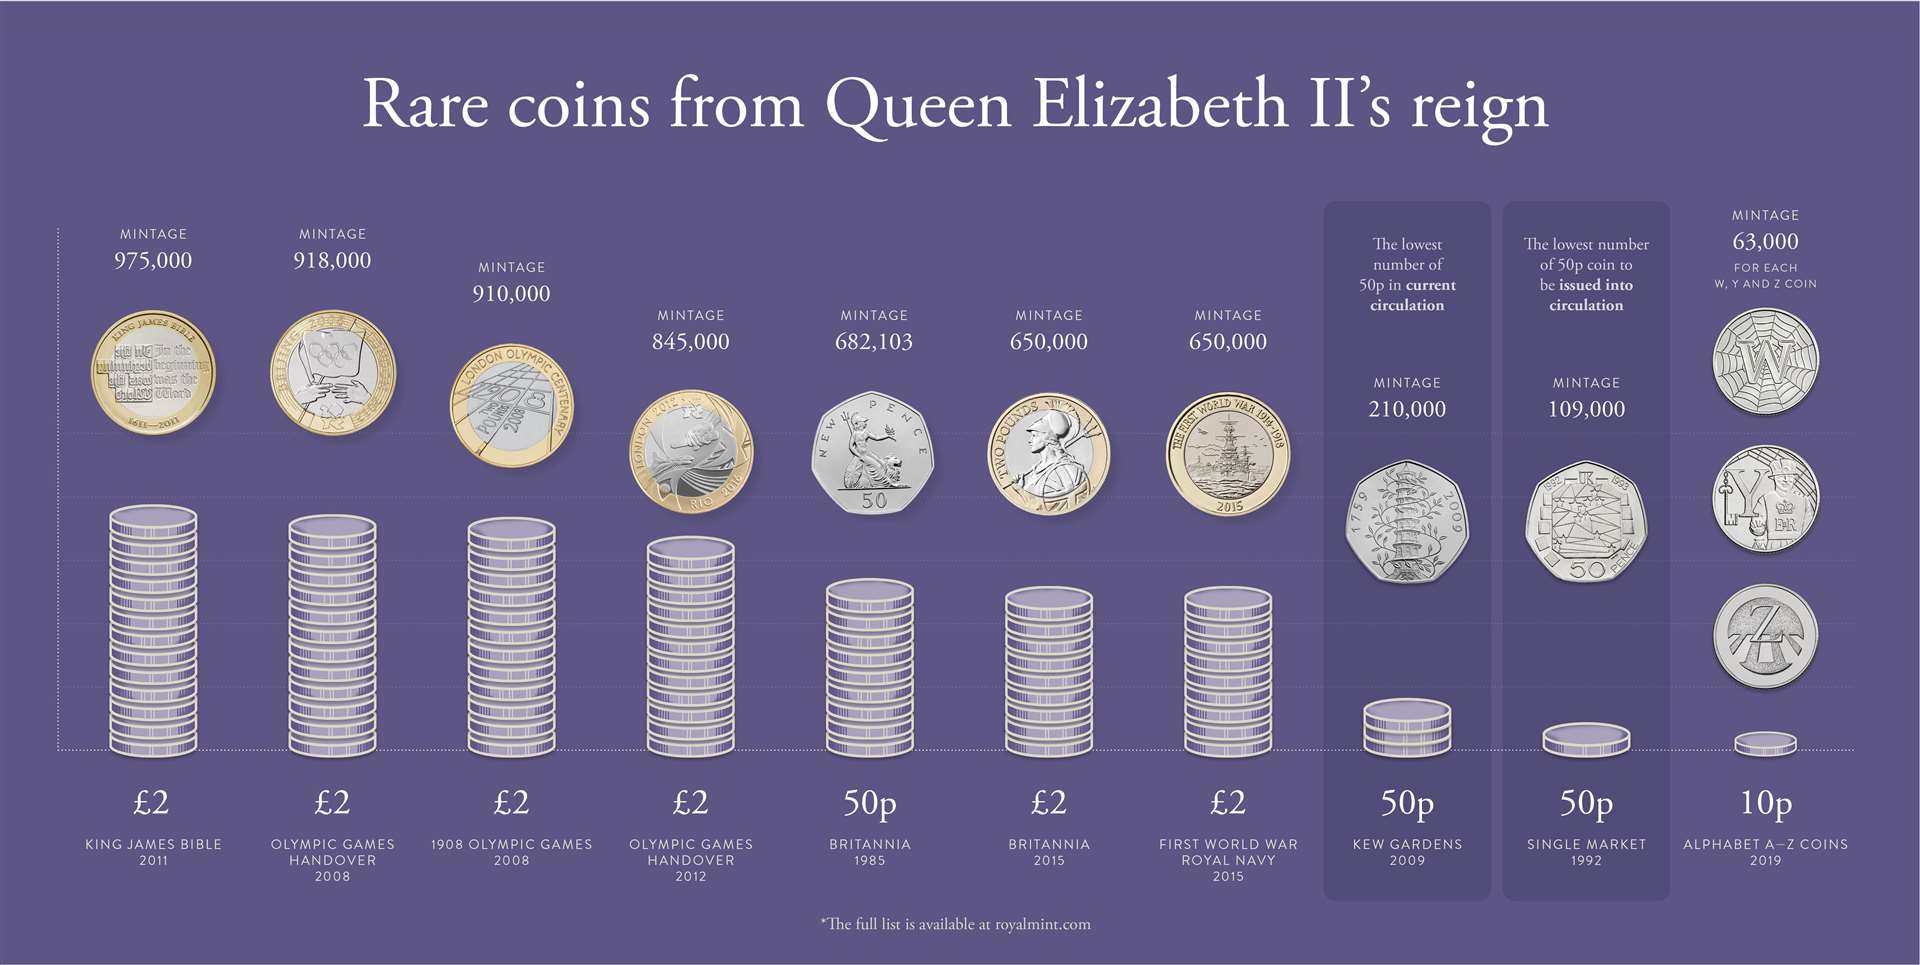 In August, a list of rare coins from the Queen's reign was released